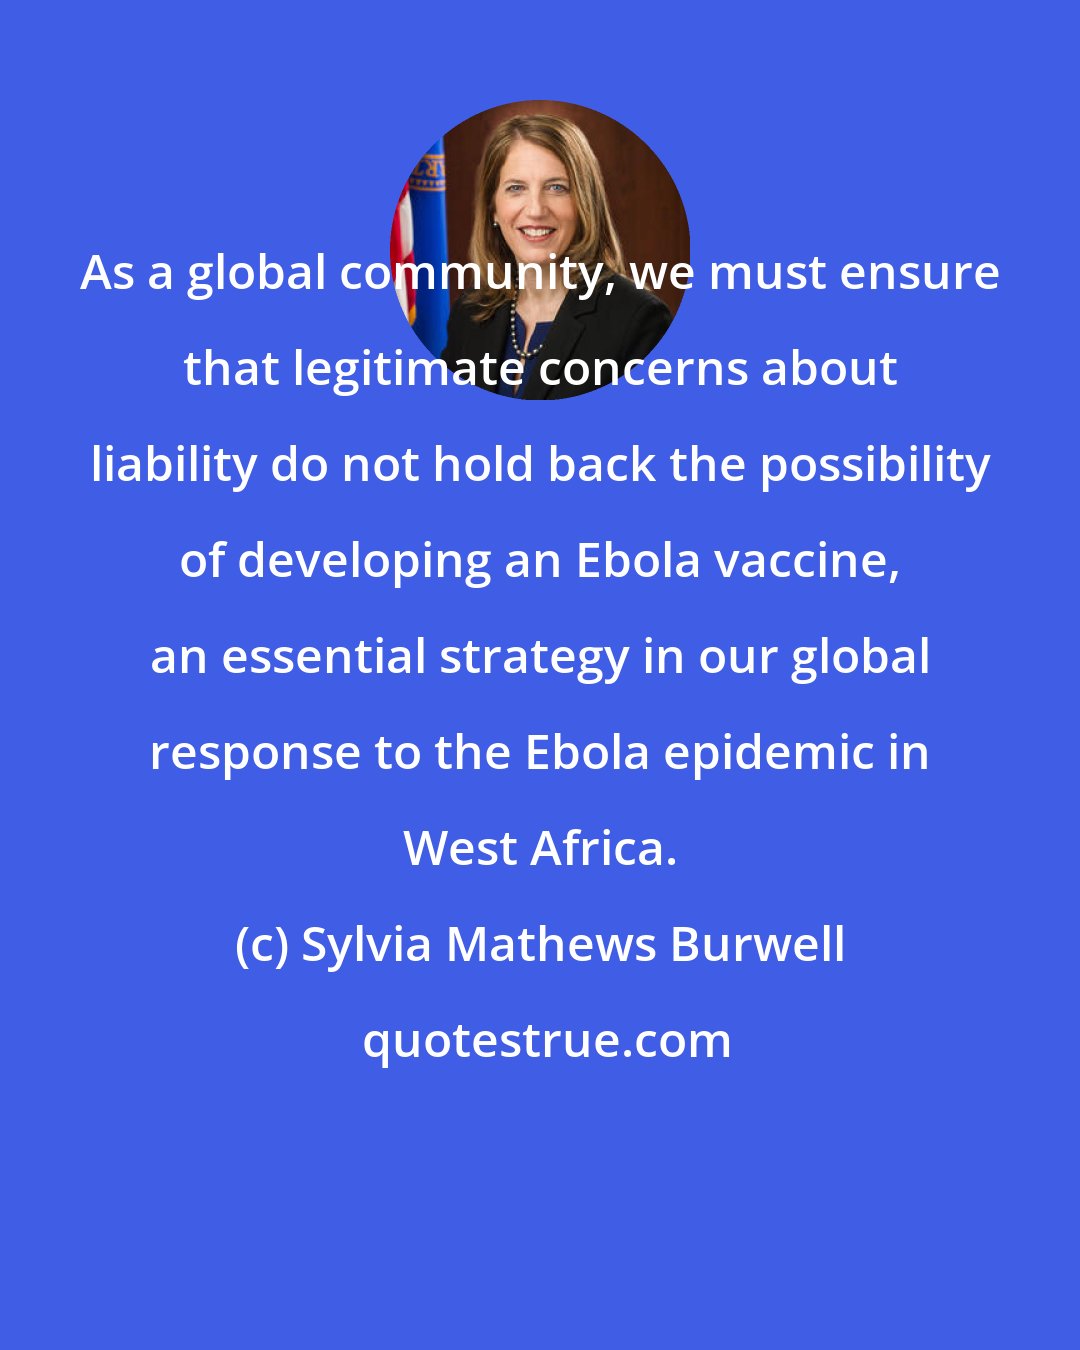 Sylvia Mathews Burwell: As a global community, we must ensure that legitimate concerns about liability do not hold back the possibility of developing an Ebola vaccine, an essential strategy in our global response to the Ebola epidemic in West Africa.